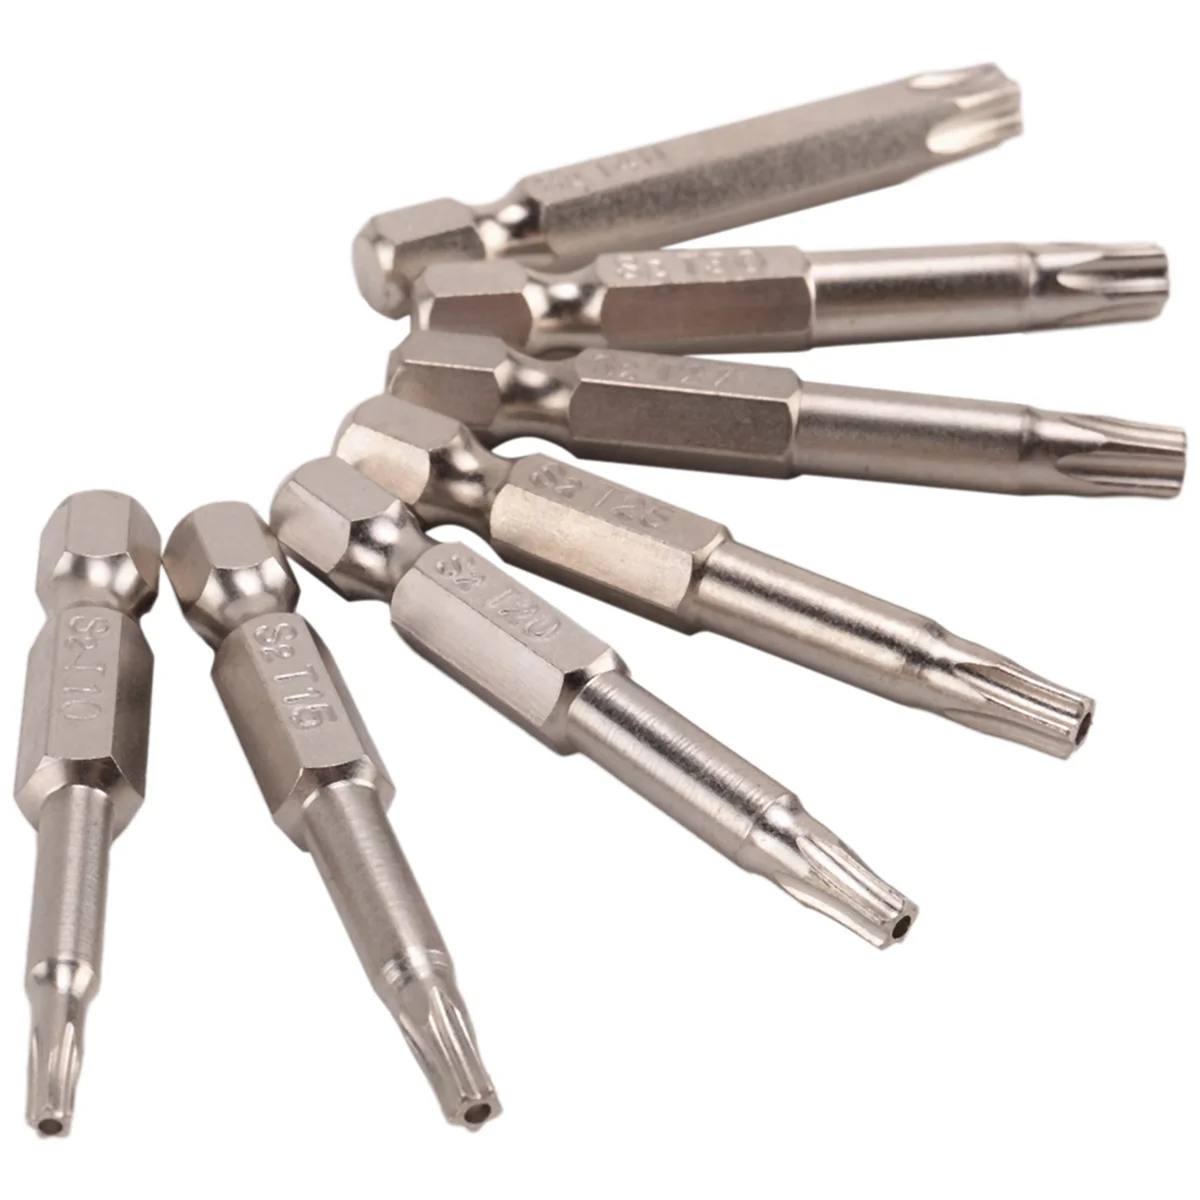 

7Pcs Set Star Bit Screwdriver Drill Bits Screw Driver Magnetic 1/4Inch Hex Shank Hand Tools Five-Pointed Star Bore Hole